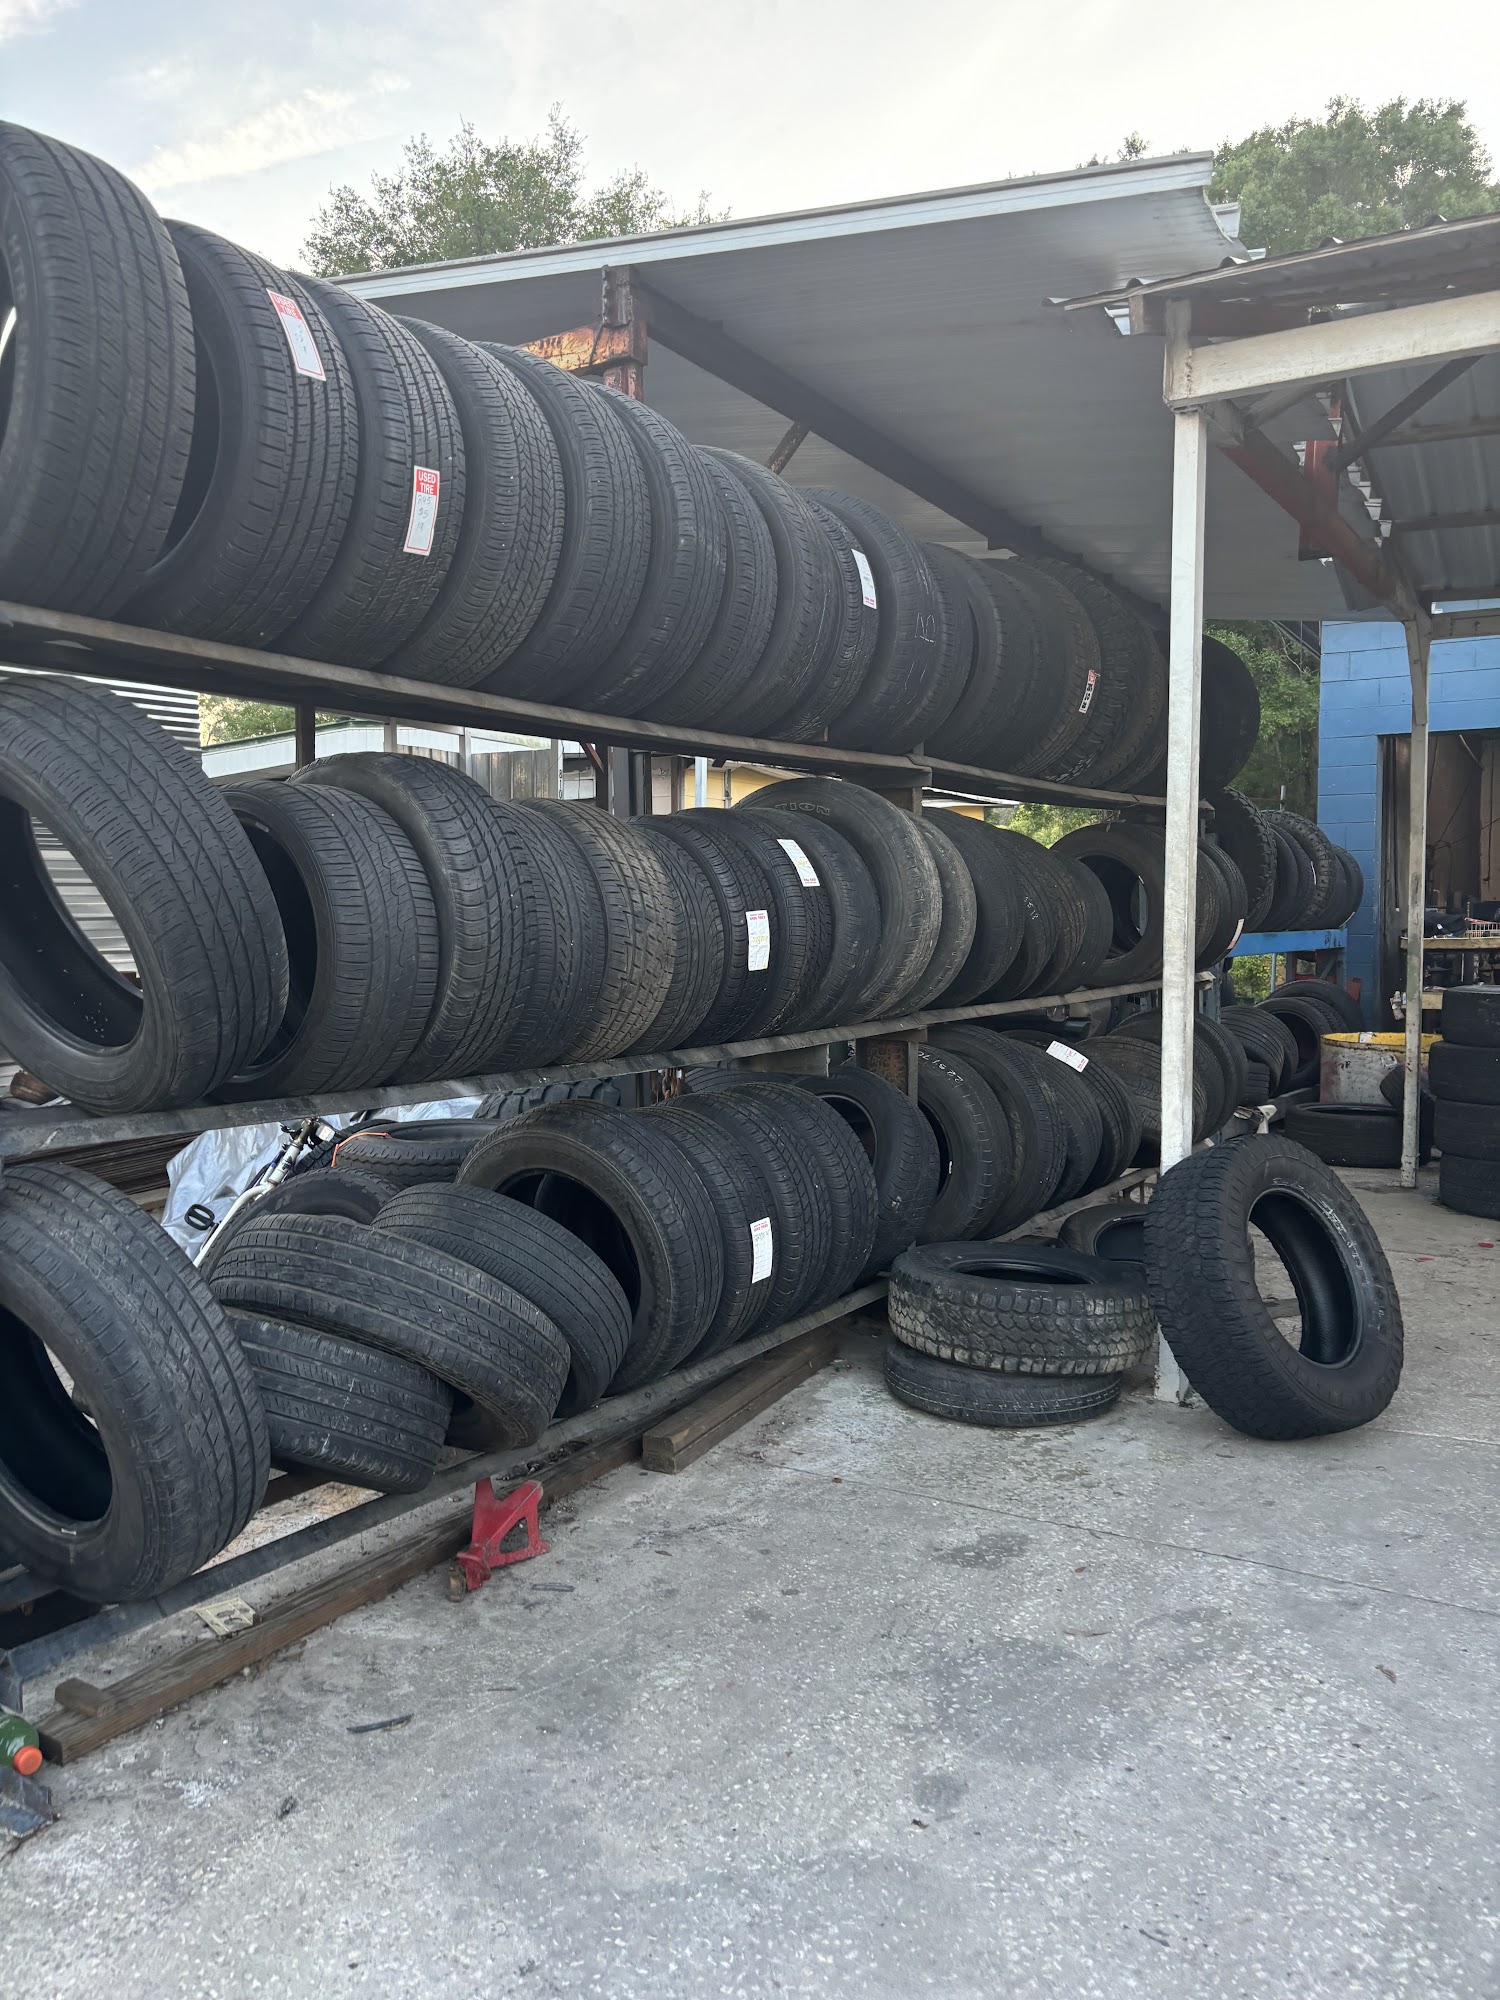 Big Dawg Tires New and Used Tire Shop